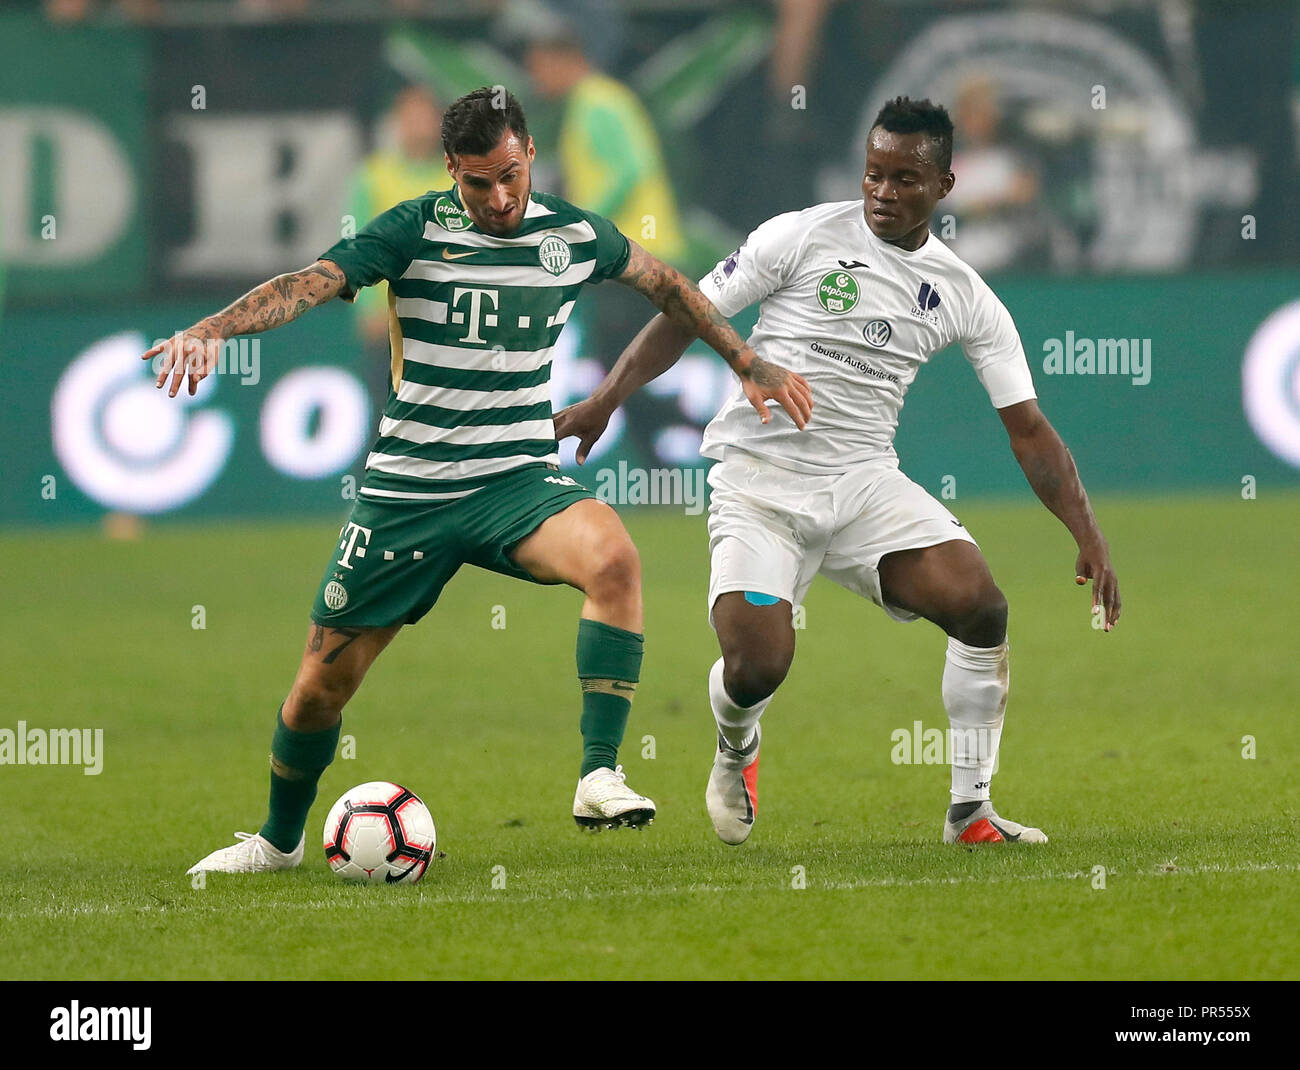 BUDAPEST, HUNGARY - JULY 24: Davide Lanzafame of Ferencvarosi TC celebrates  his goal during the UEFA Champions League Qualifying Round match between Ferencvarosi  TC and Valletta FC at Ferencvaros Stadium on July